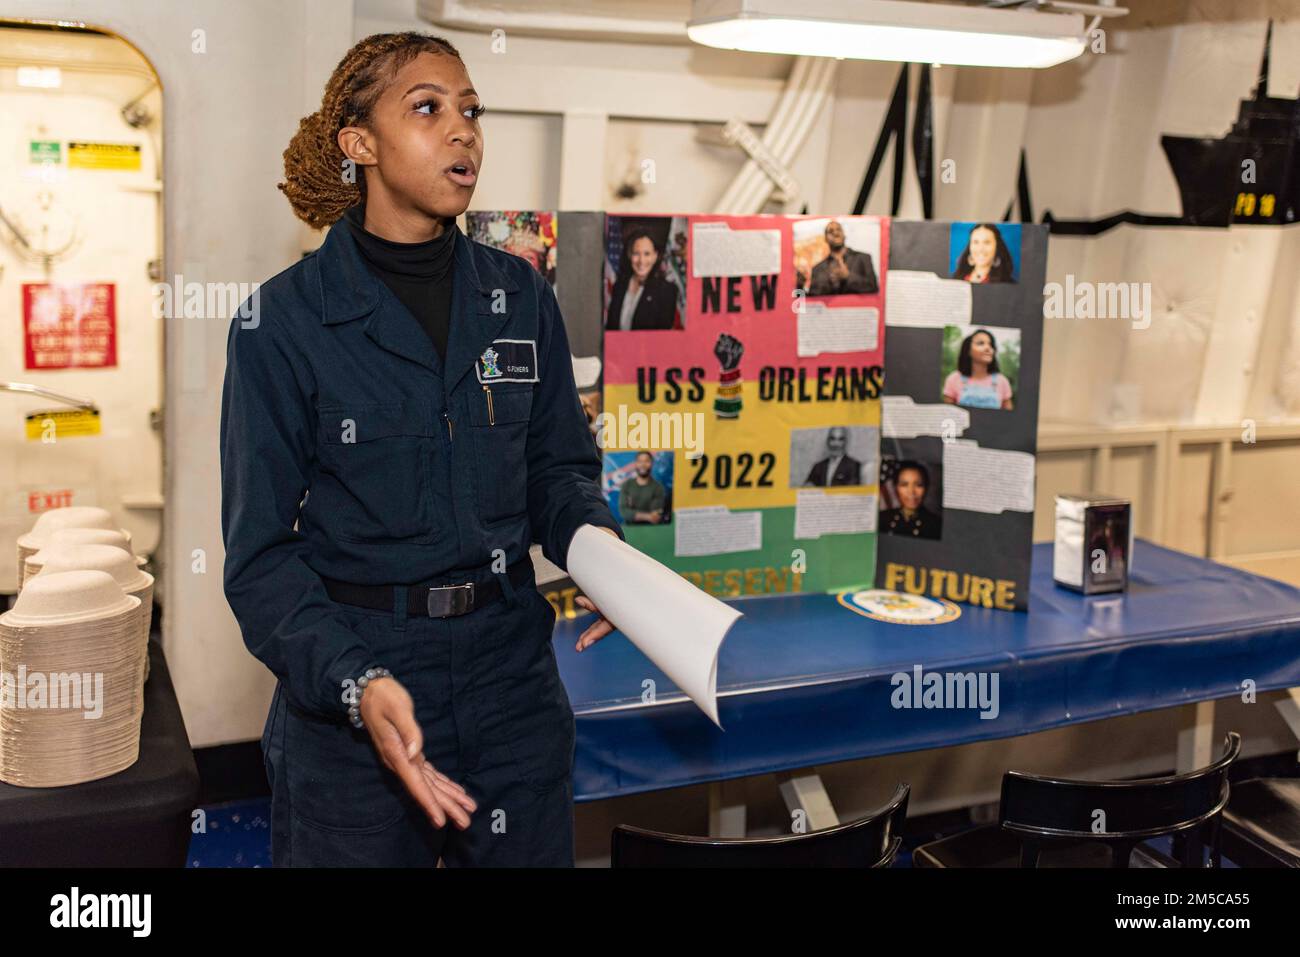 220228-N-XB010-1013 EAST CHINA SEA (Feb. 28, 2022) Logistics Specialist Seaman Cicely Flowers presents a speech during a Black History Month presentation by USS New Orleans’ (LPD 18) Diversity Committee. New Orleans, part of the America Amphibious Ready Group, along with the 31st Marine Expeditionary Unit, is operating in the U.S. 7th Fleet area of responsibility to enhance interoperability with allies and partners and serve as a ready response force to defend peace and stability in the Indo-Pacific region. Stock Photo